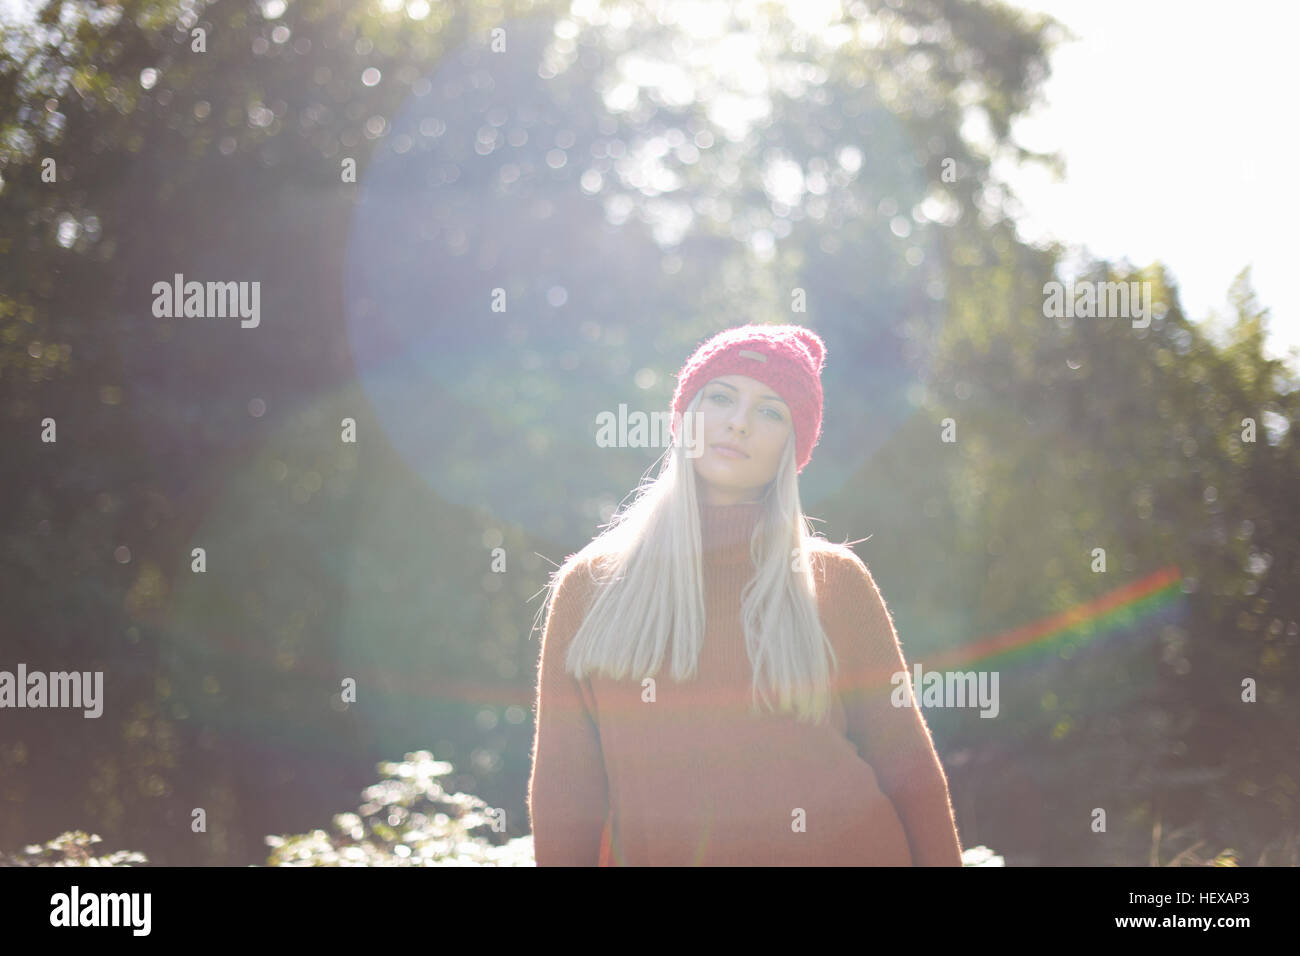 Portrait of woman in forest wearing knit hat looking at camera Stock Photo